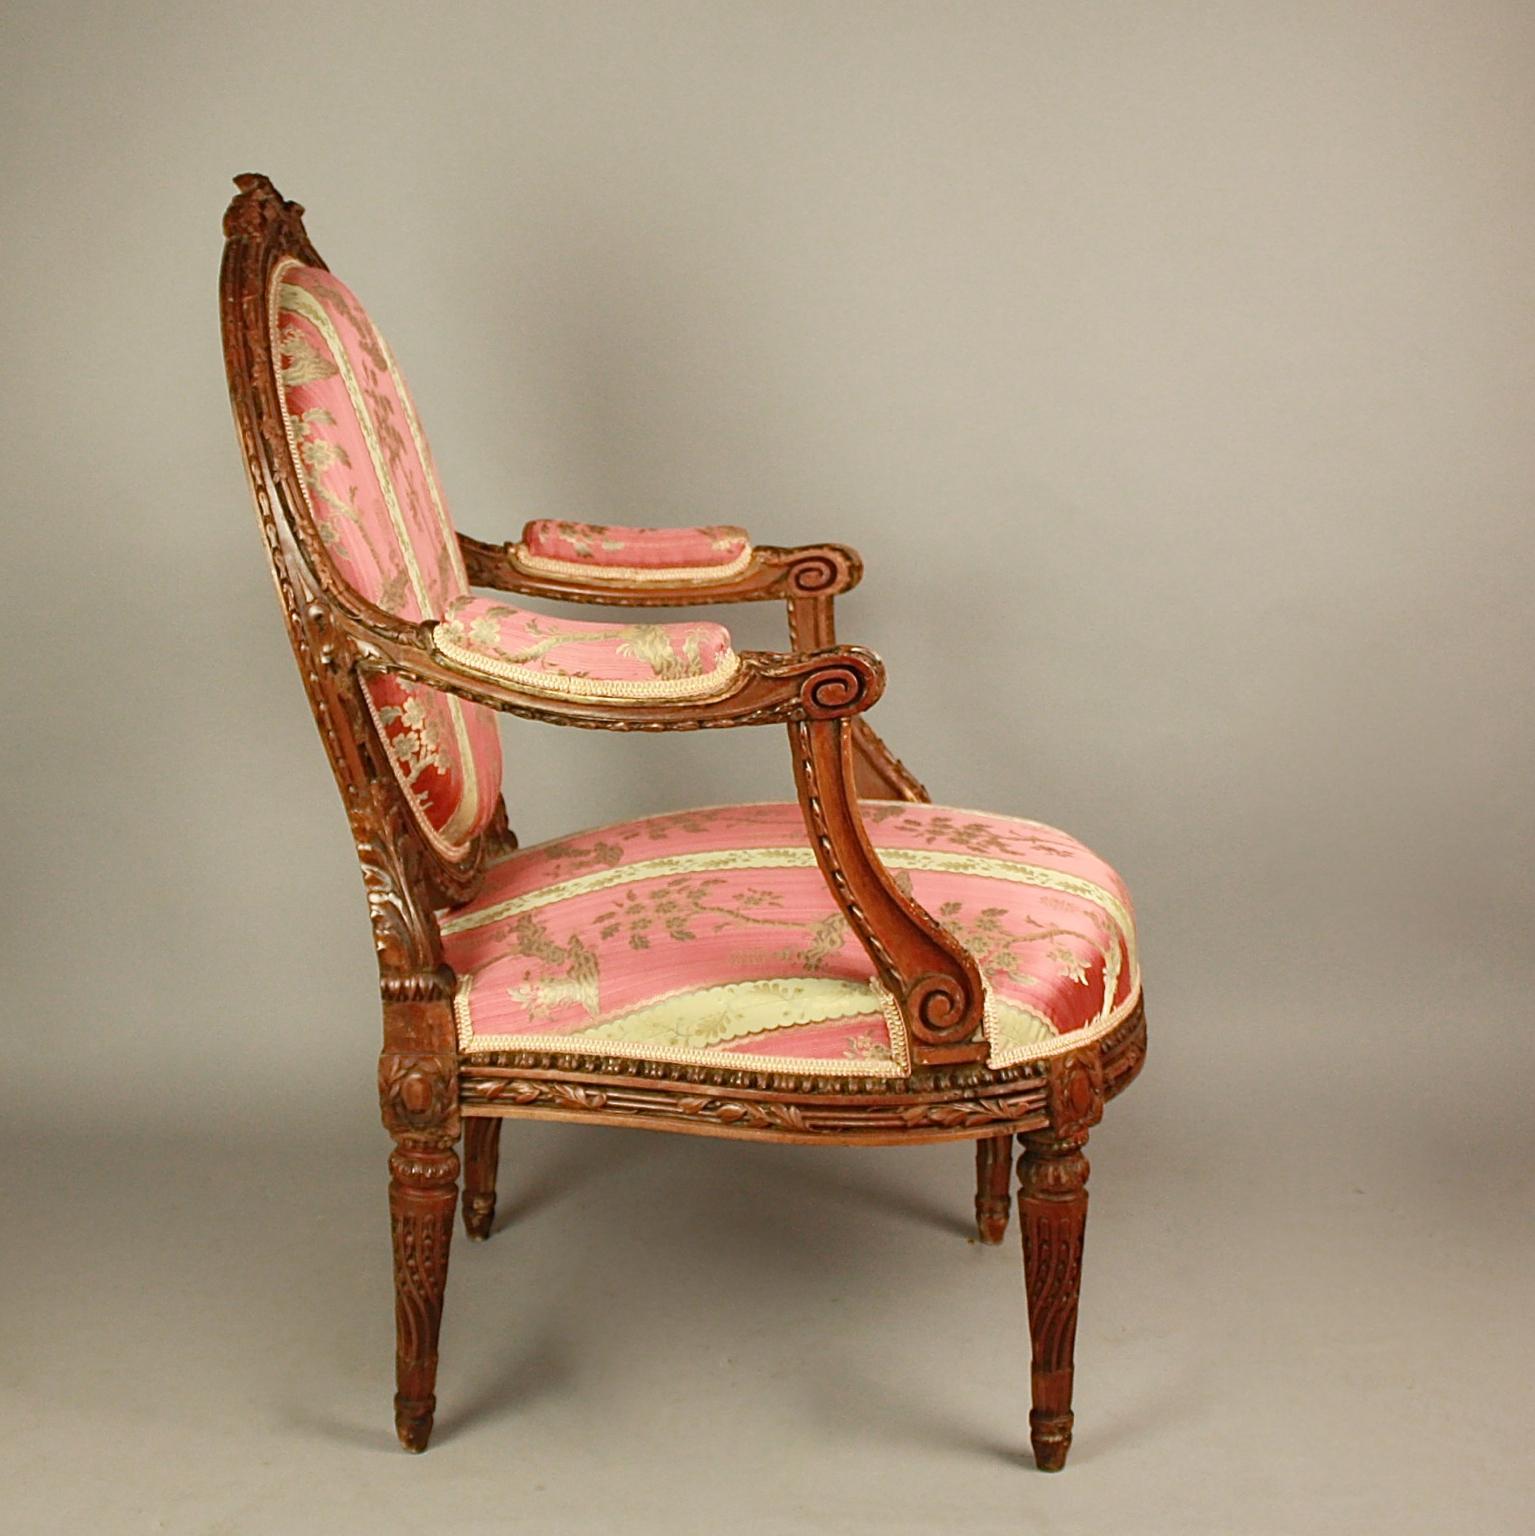 Carved Pair of 19th Ct. Louis XVI Style Walnut Fauteuils or Armchairs after J.-R. Nadal